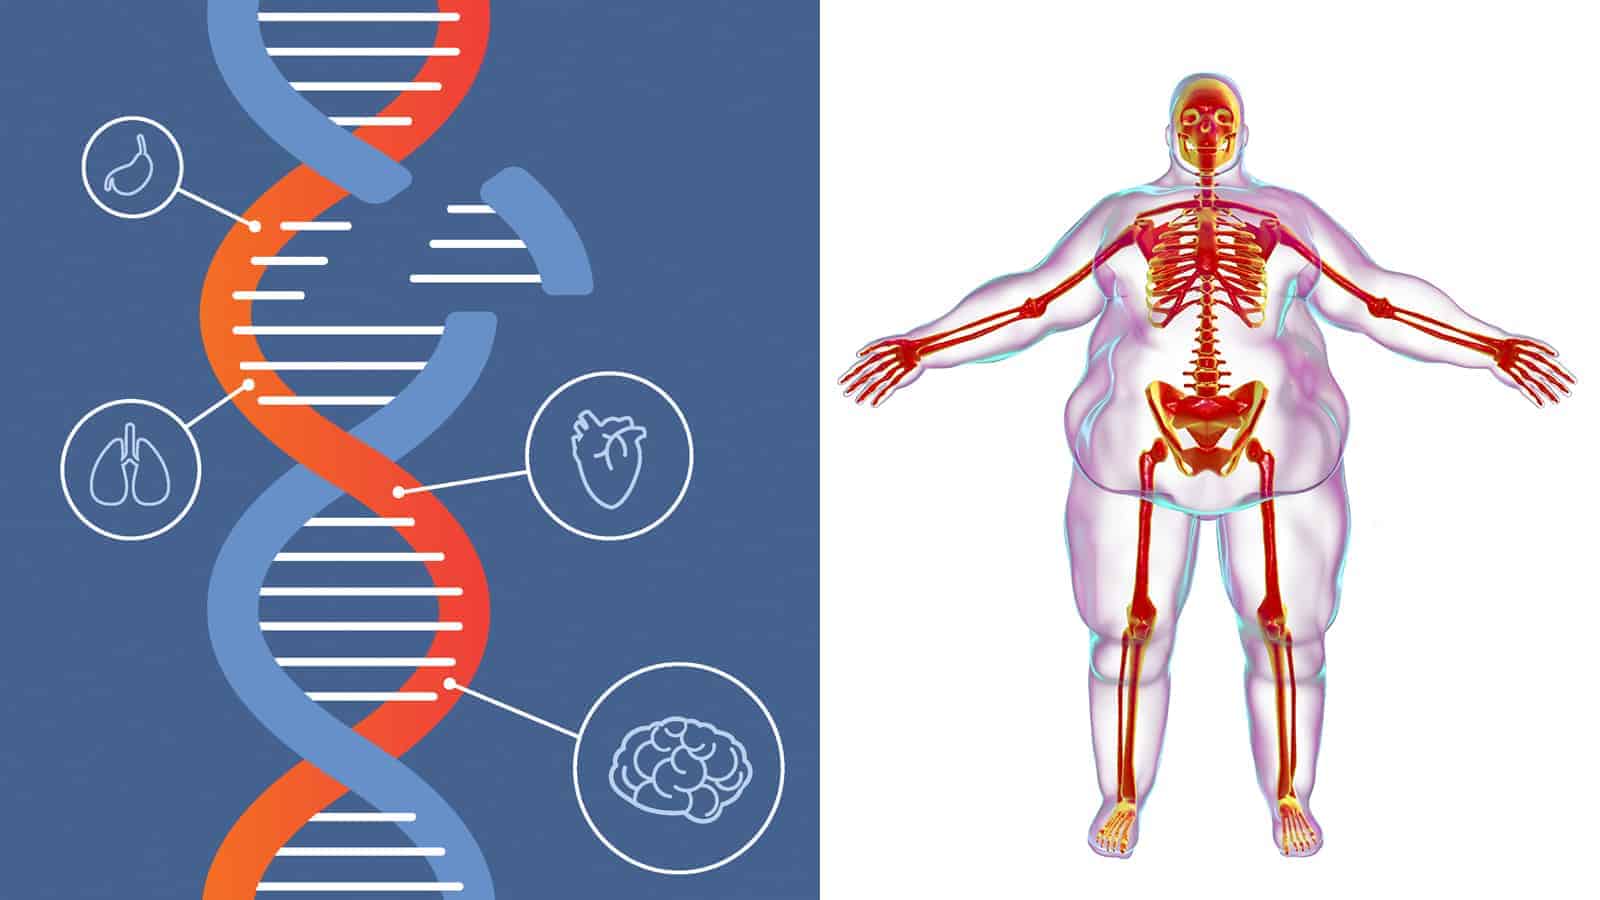 UVA Researchers Explain The 14 Genes That Cause Obesity